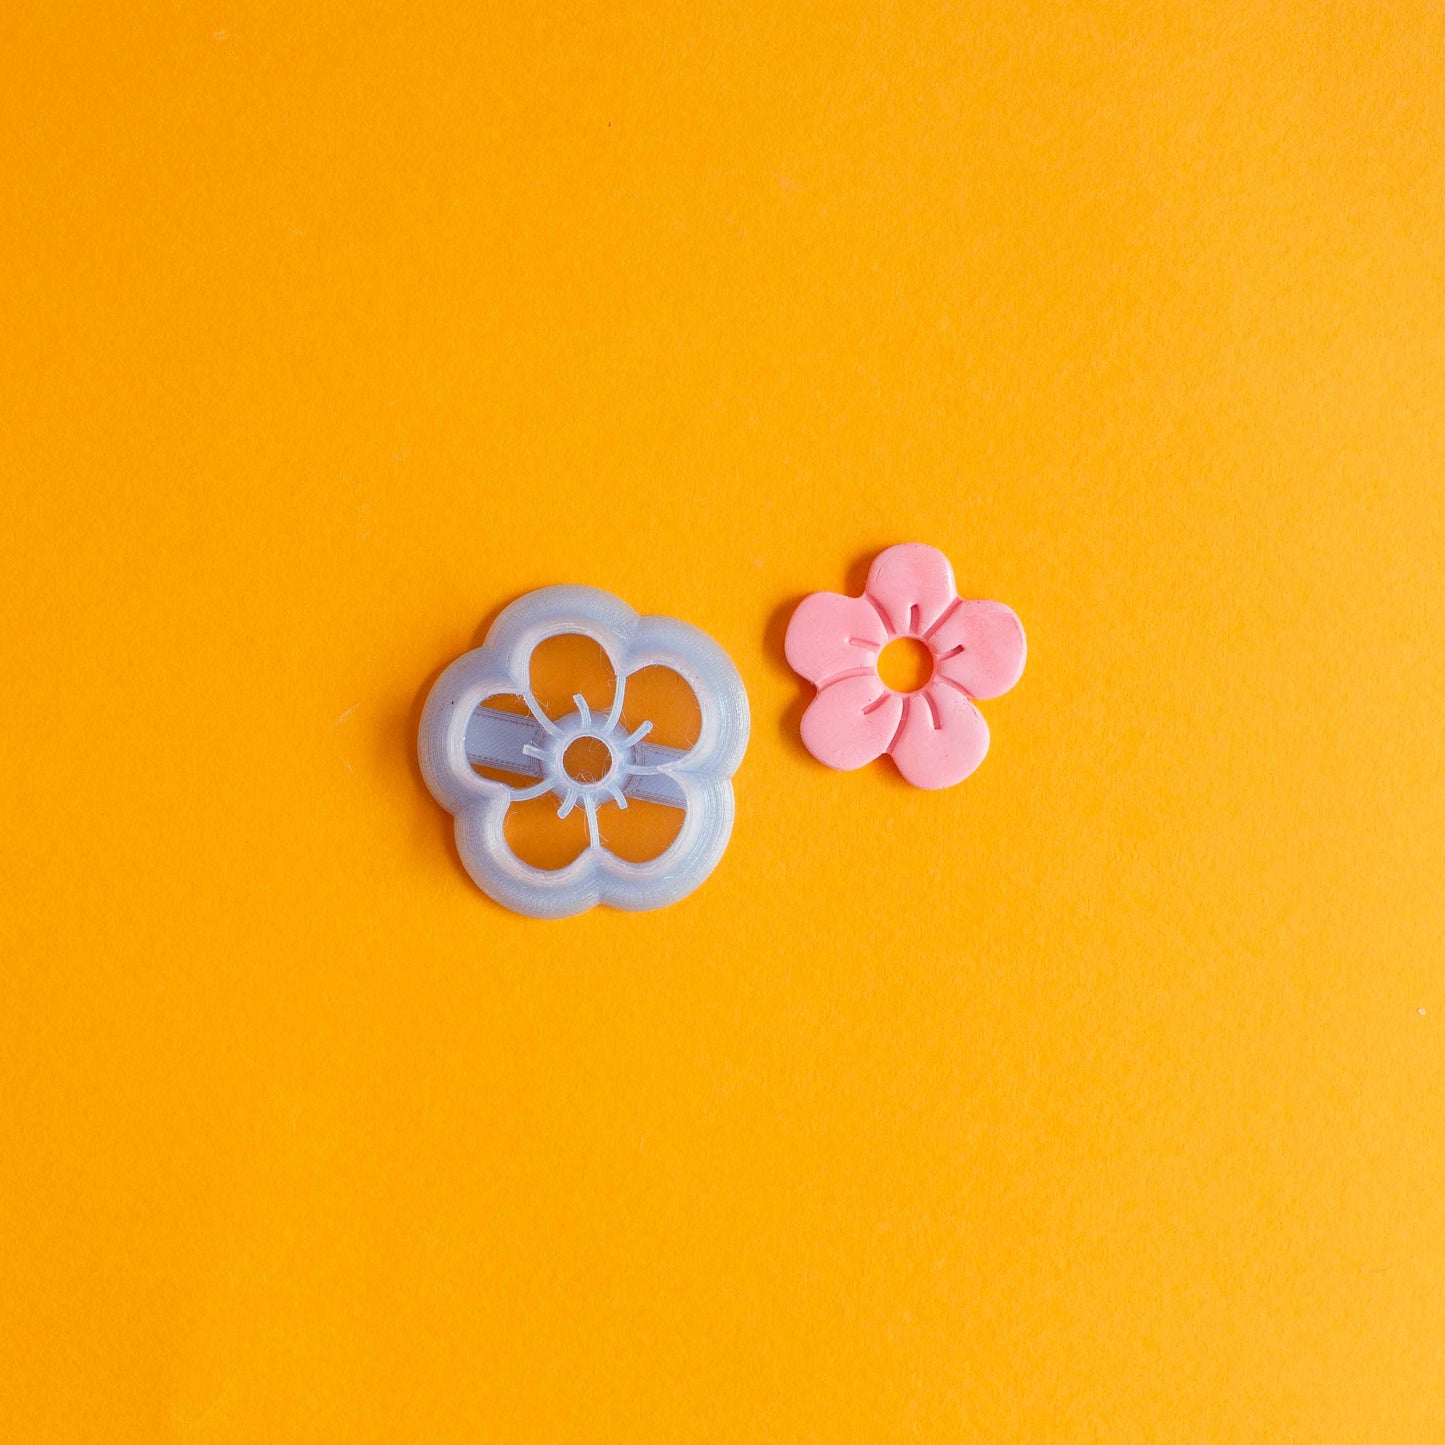 Flower shaped cutter and pink polymer clay daisy